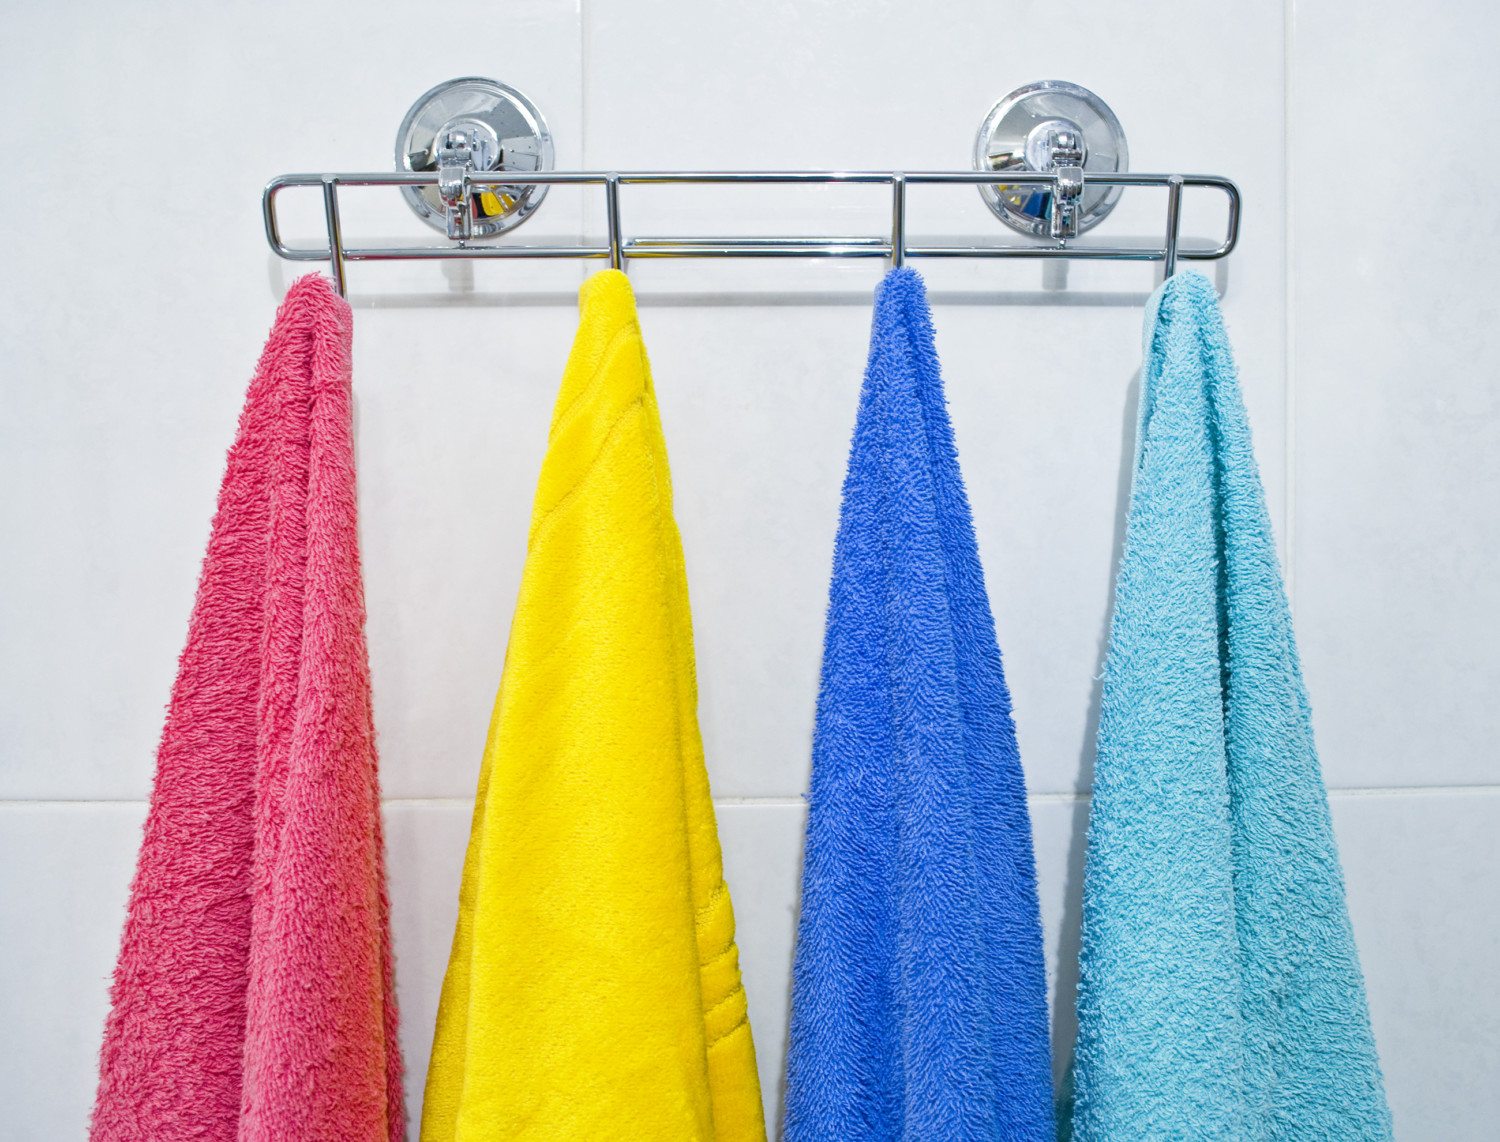 How Often Should You Wash Your Bath Towels?